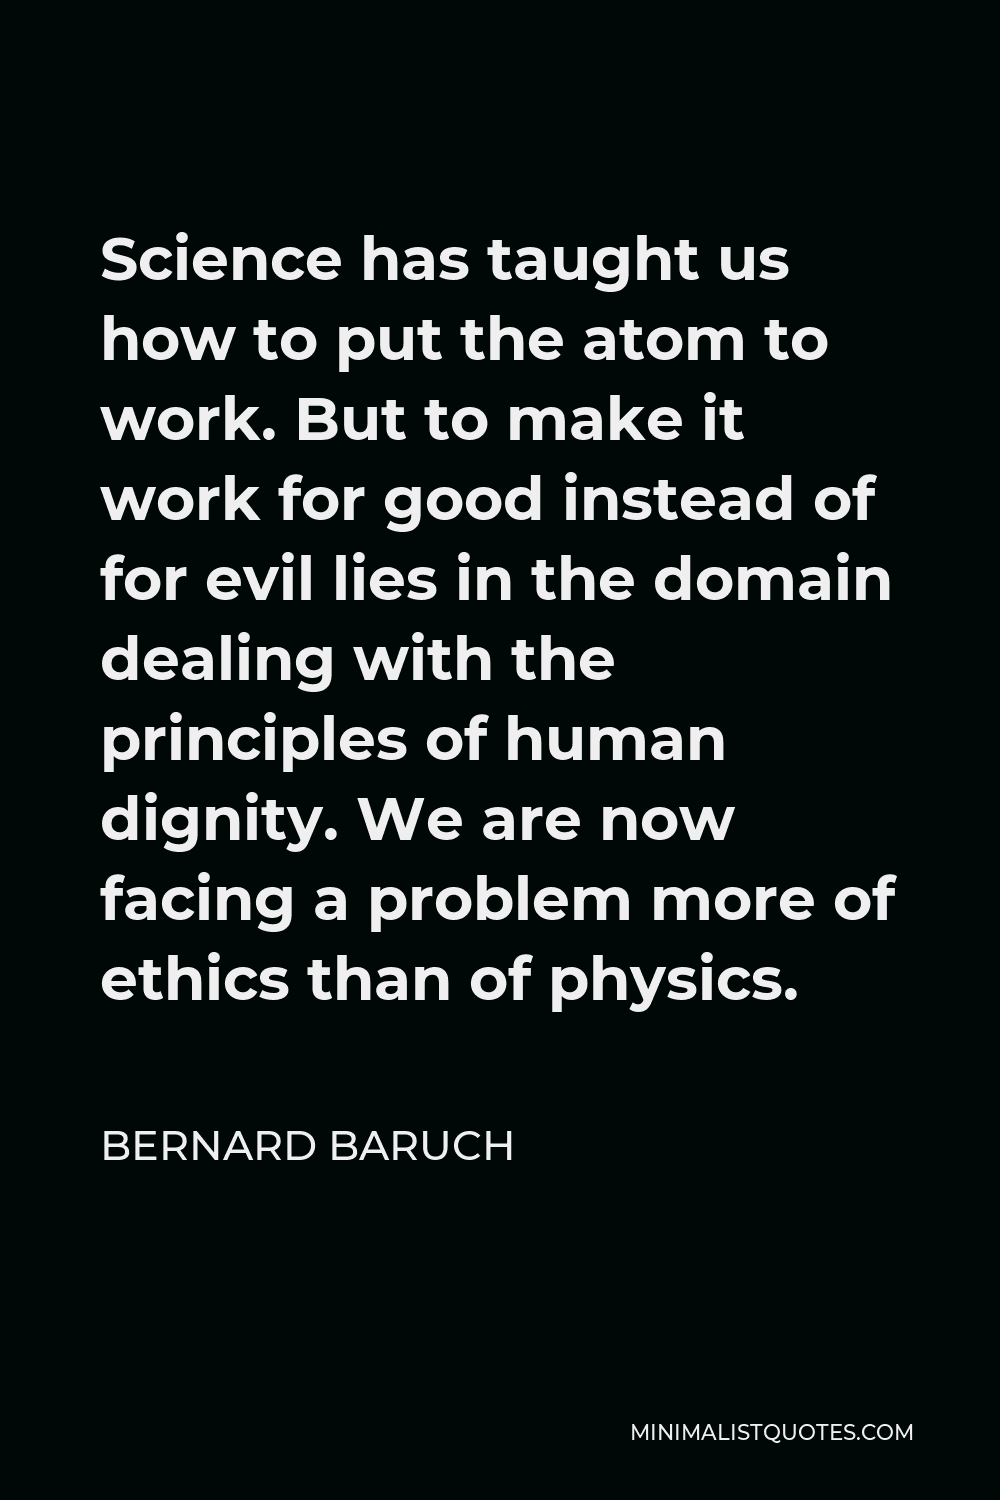 Bernard Baruch Quote - Science has taught us how to put the atom to work. But to make it work for good instead of for evil lies in the domain dealing with the principles of human dignity. We are now facing a problem more of ethics than of physics.